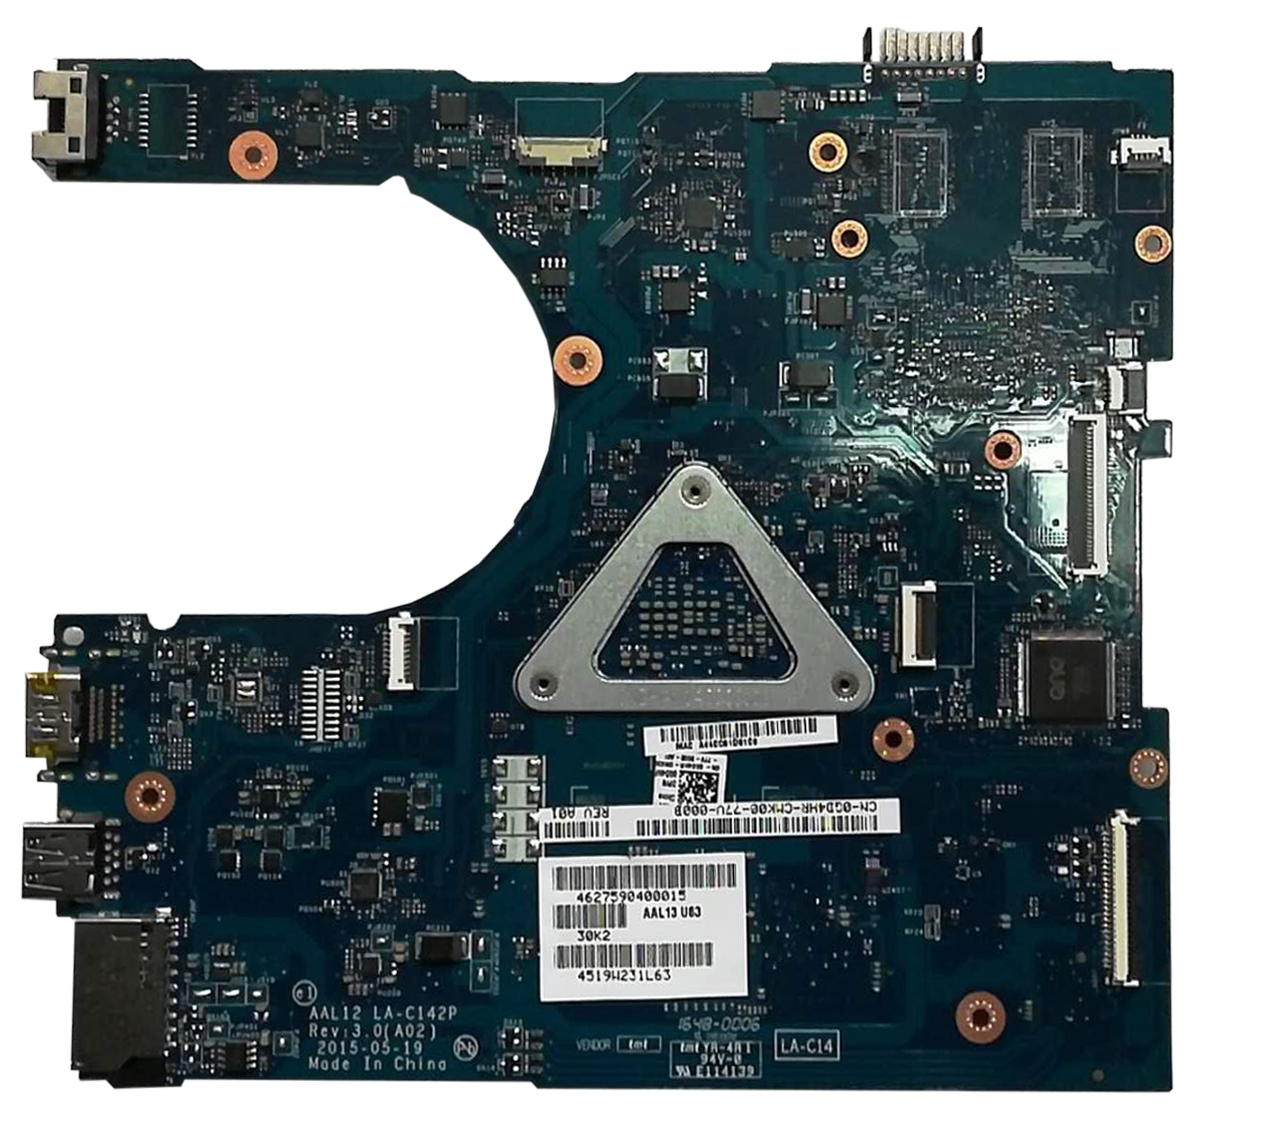 Dell Inspiron 15 5000 Motherboard Schematic